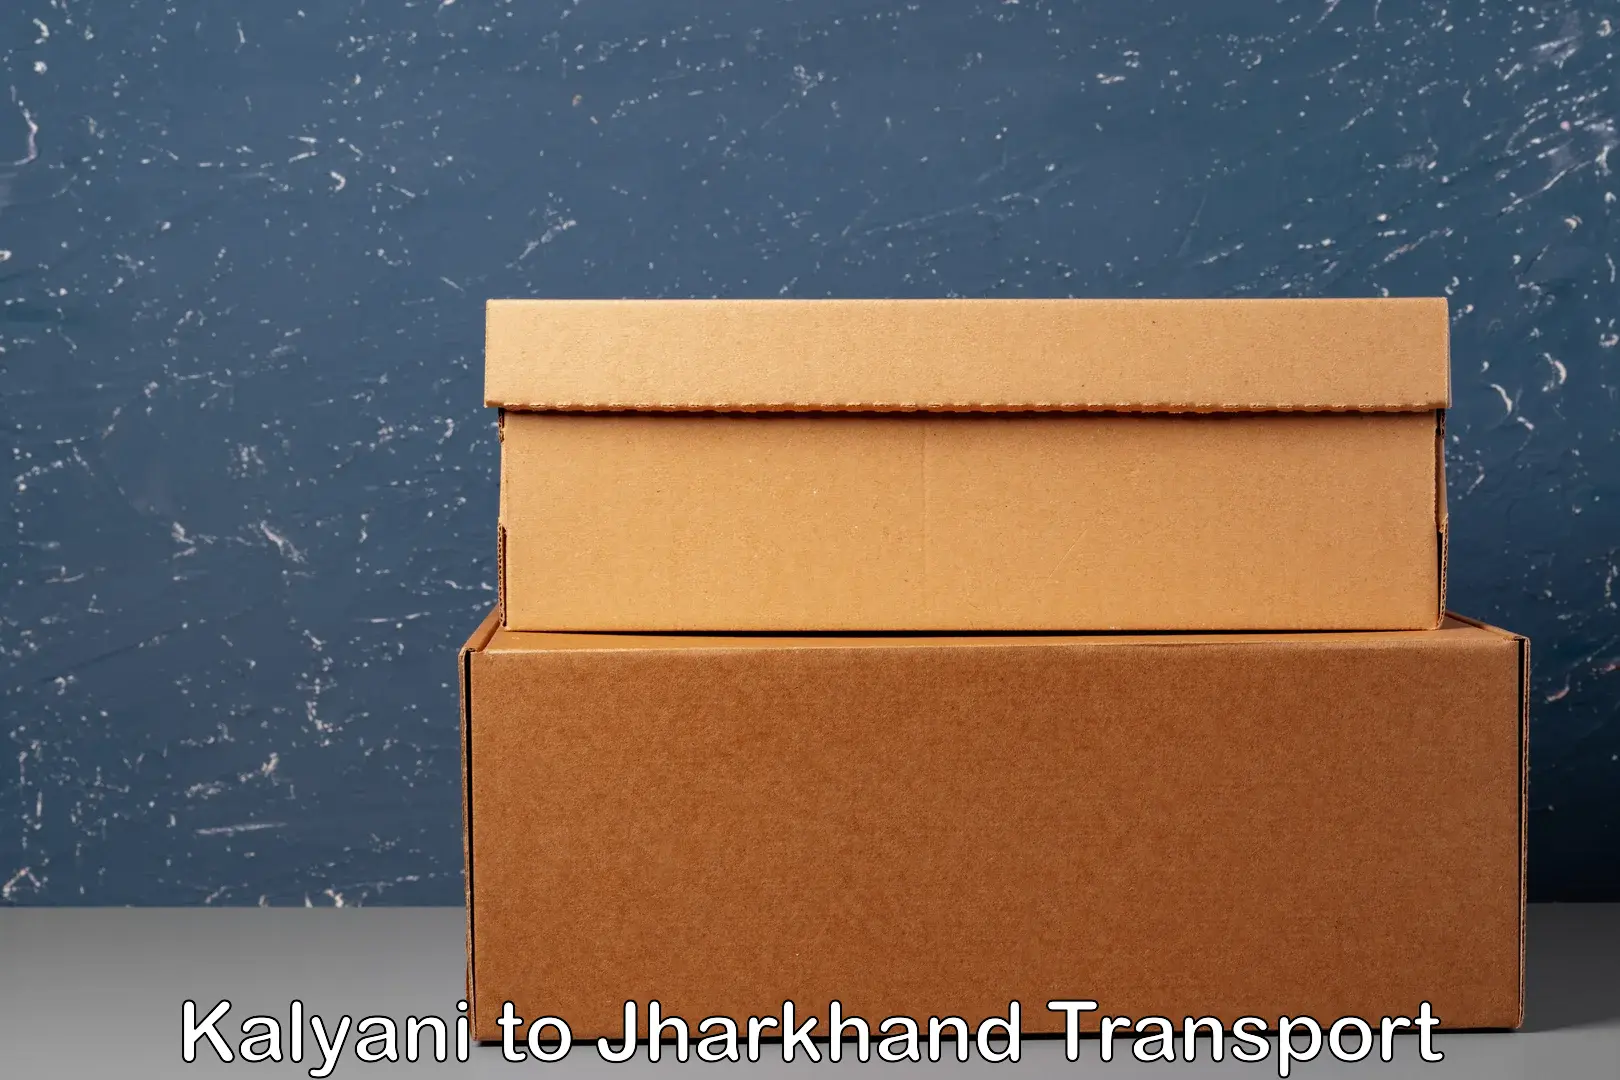 Container transport service Kalyani to Jharkhand